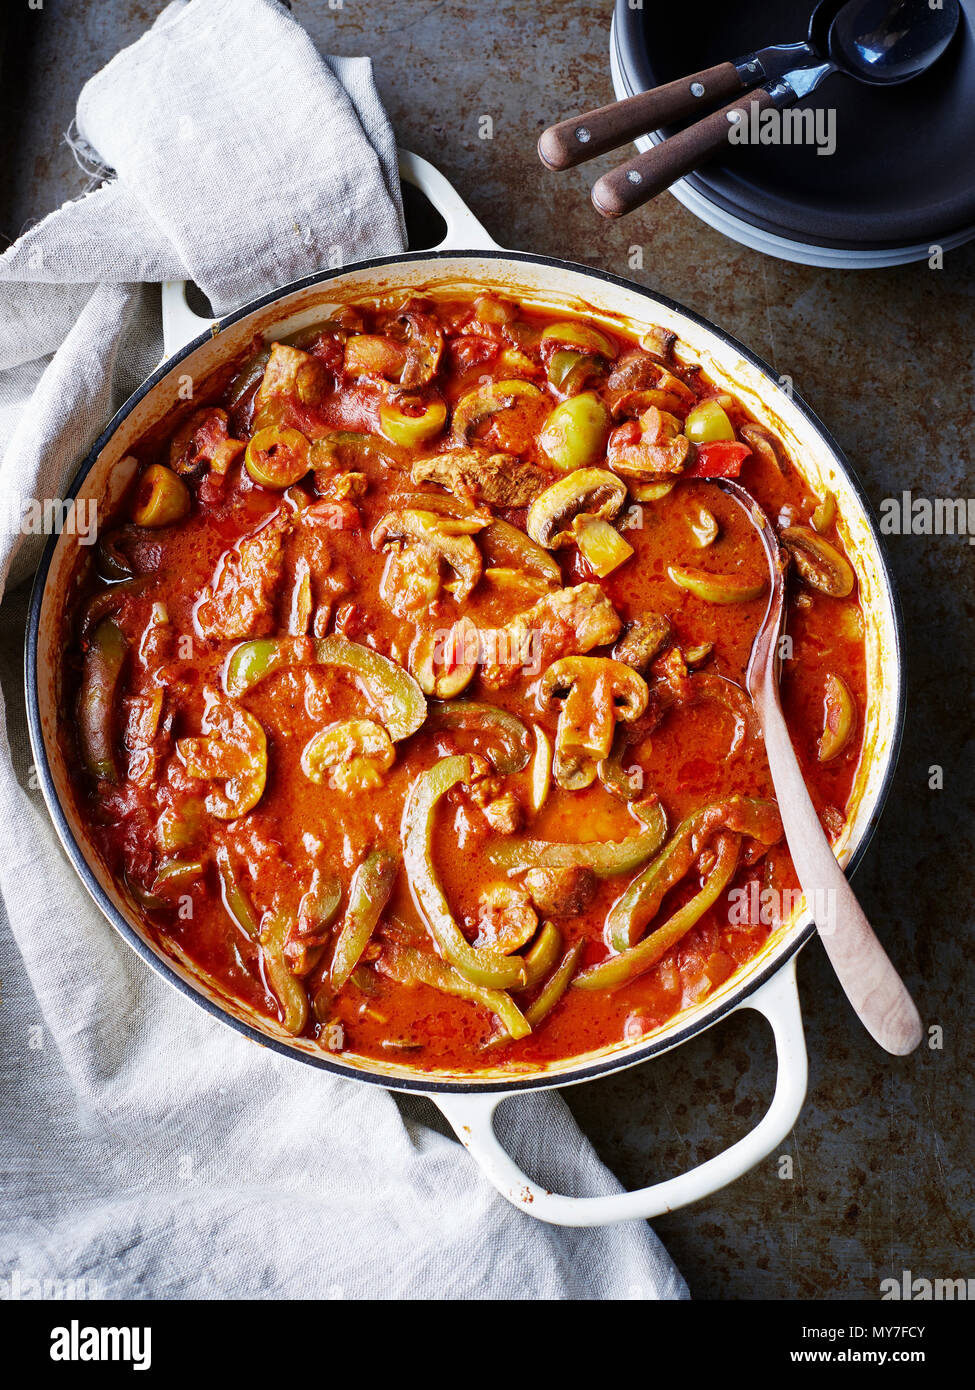 Spanish pork stew in serving dish, overhead view, close-up Stock Photo